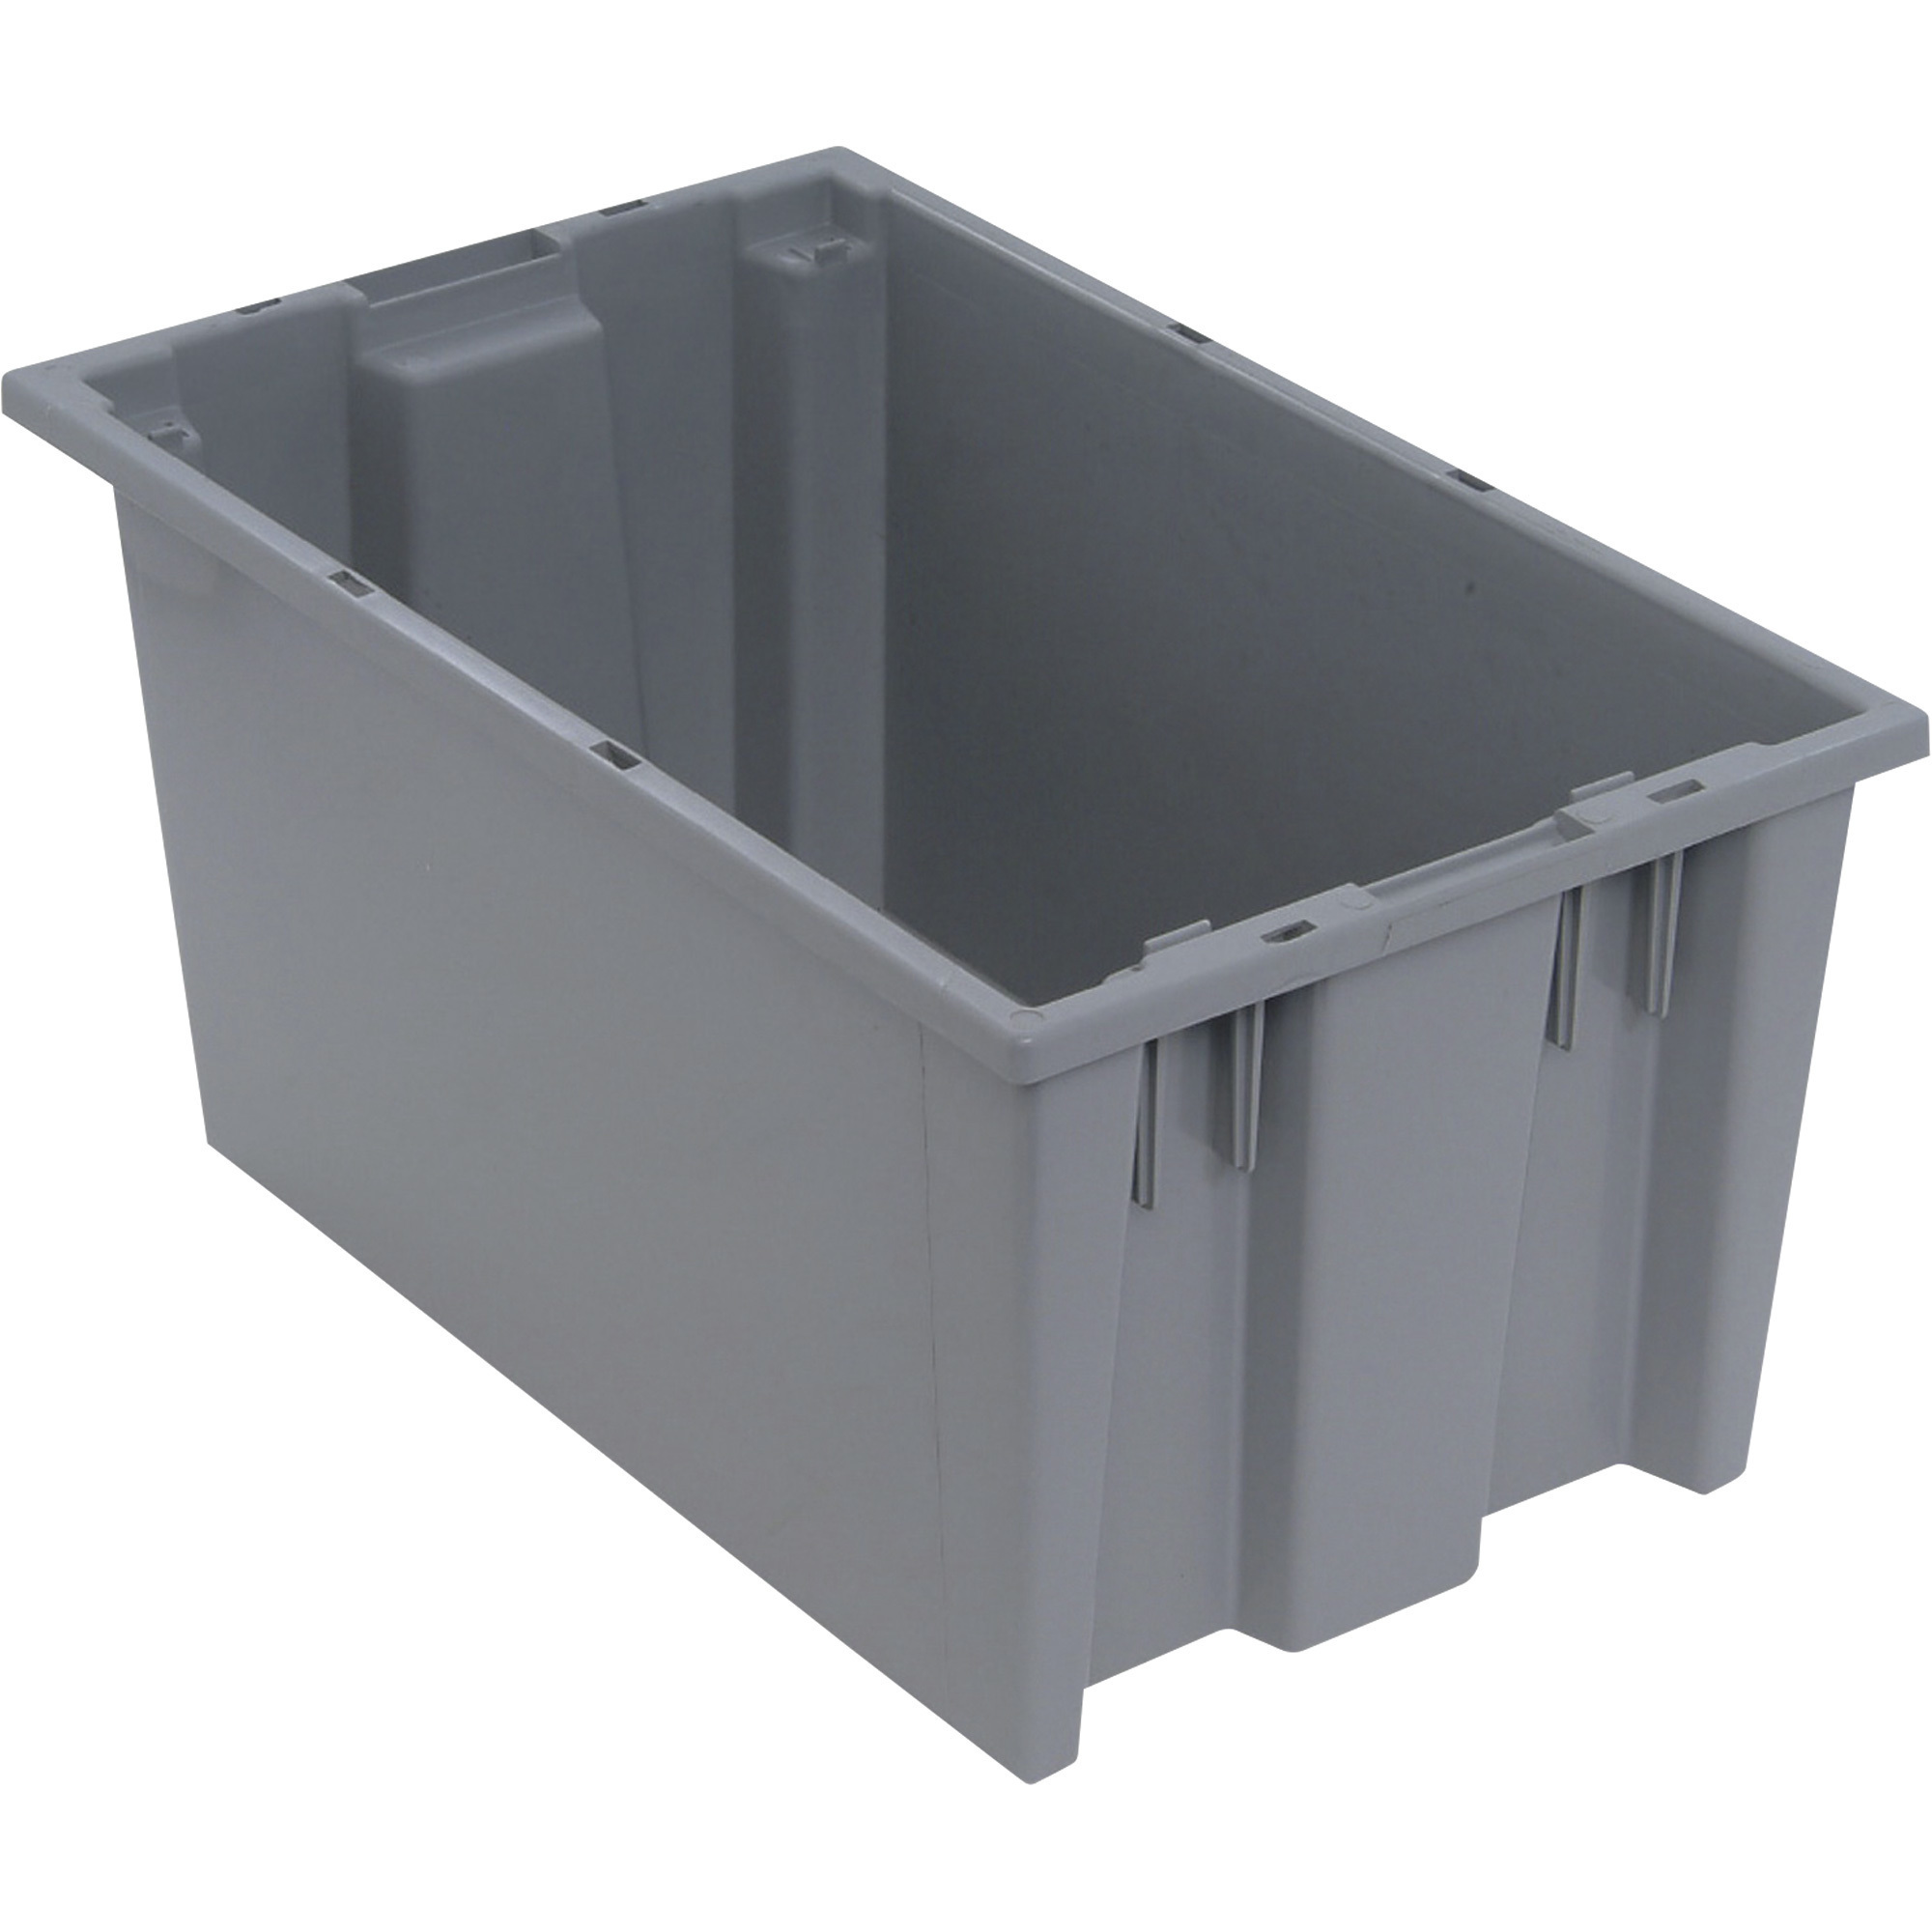 Quantum Storage Stack and Nest Tote Bin, 18Inch x 11Inch x 9Inch Size, Gray, Carton of 6, Model SNT185GYCS